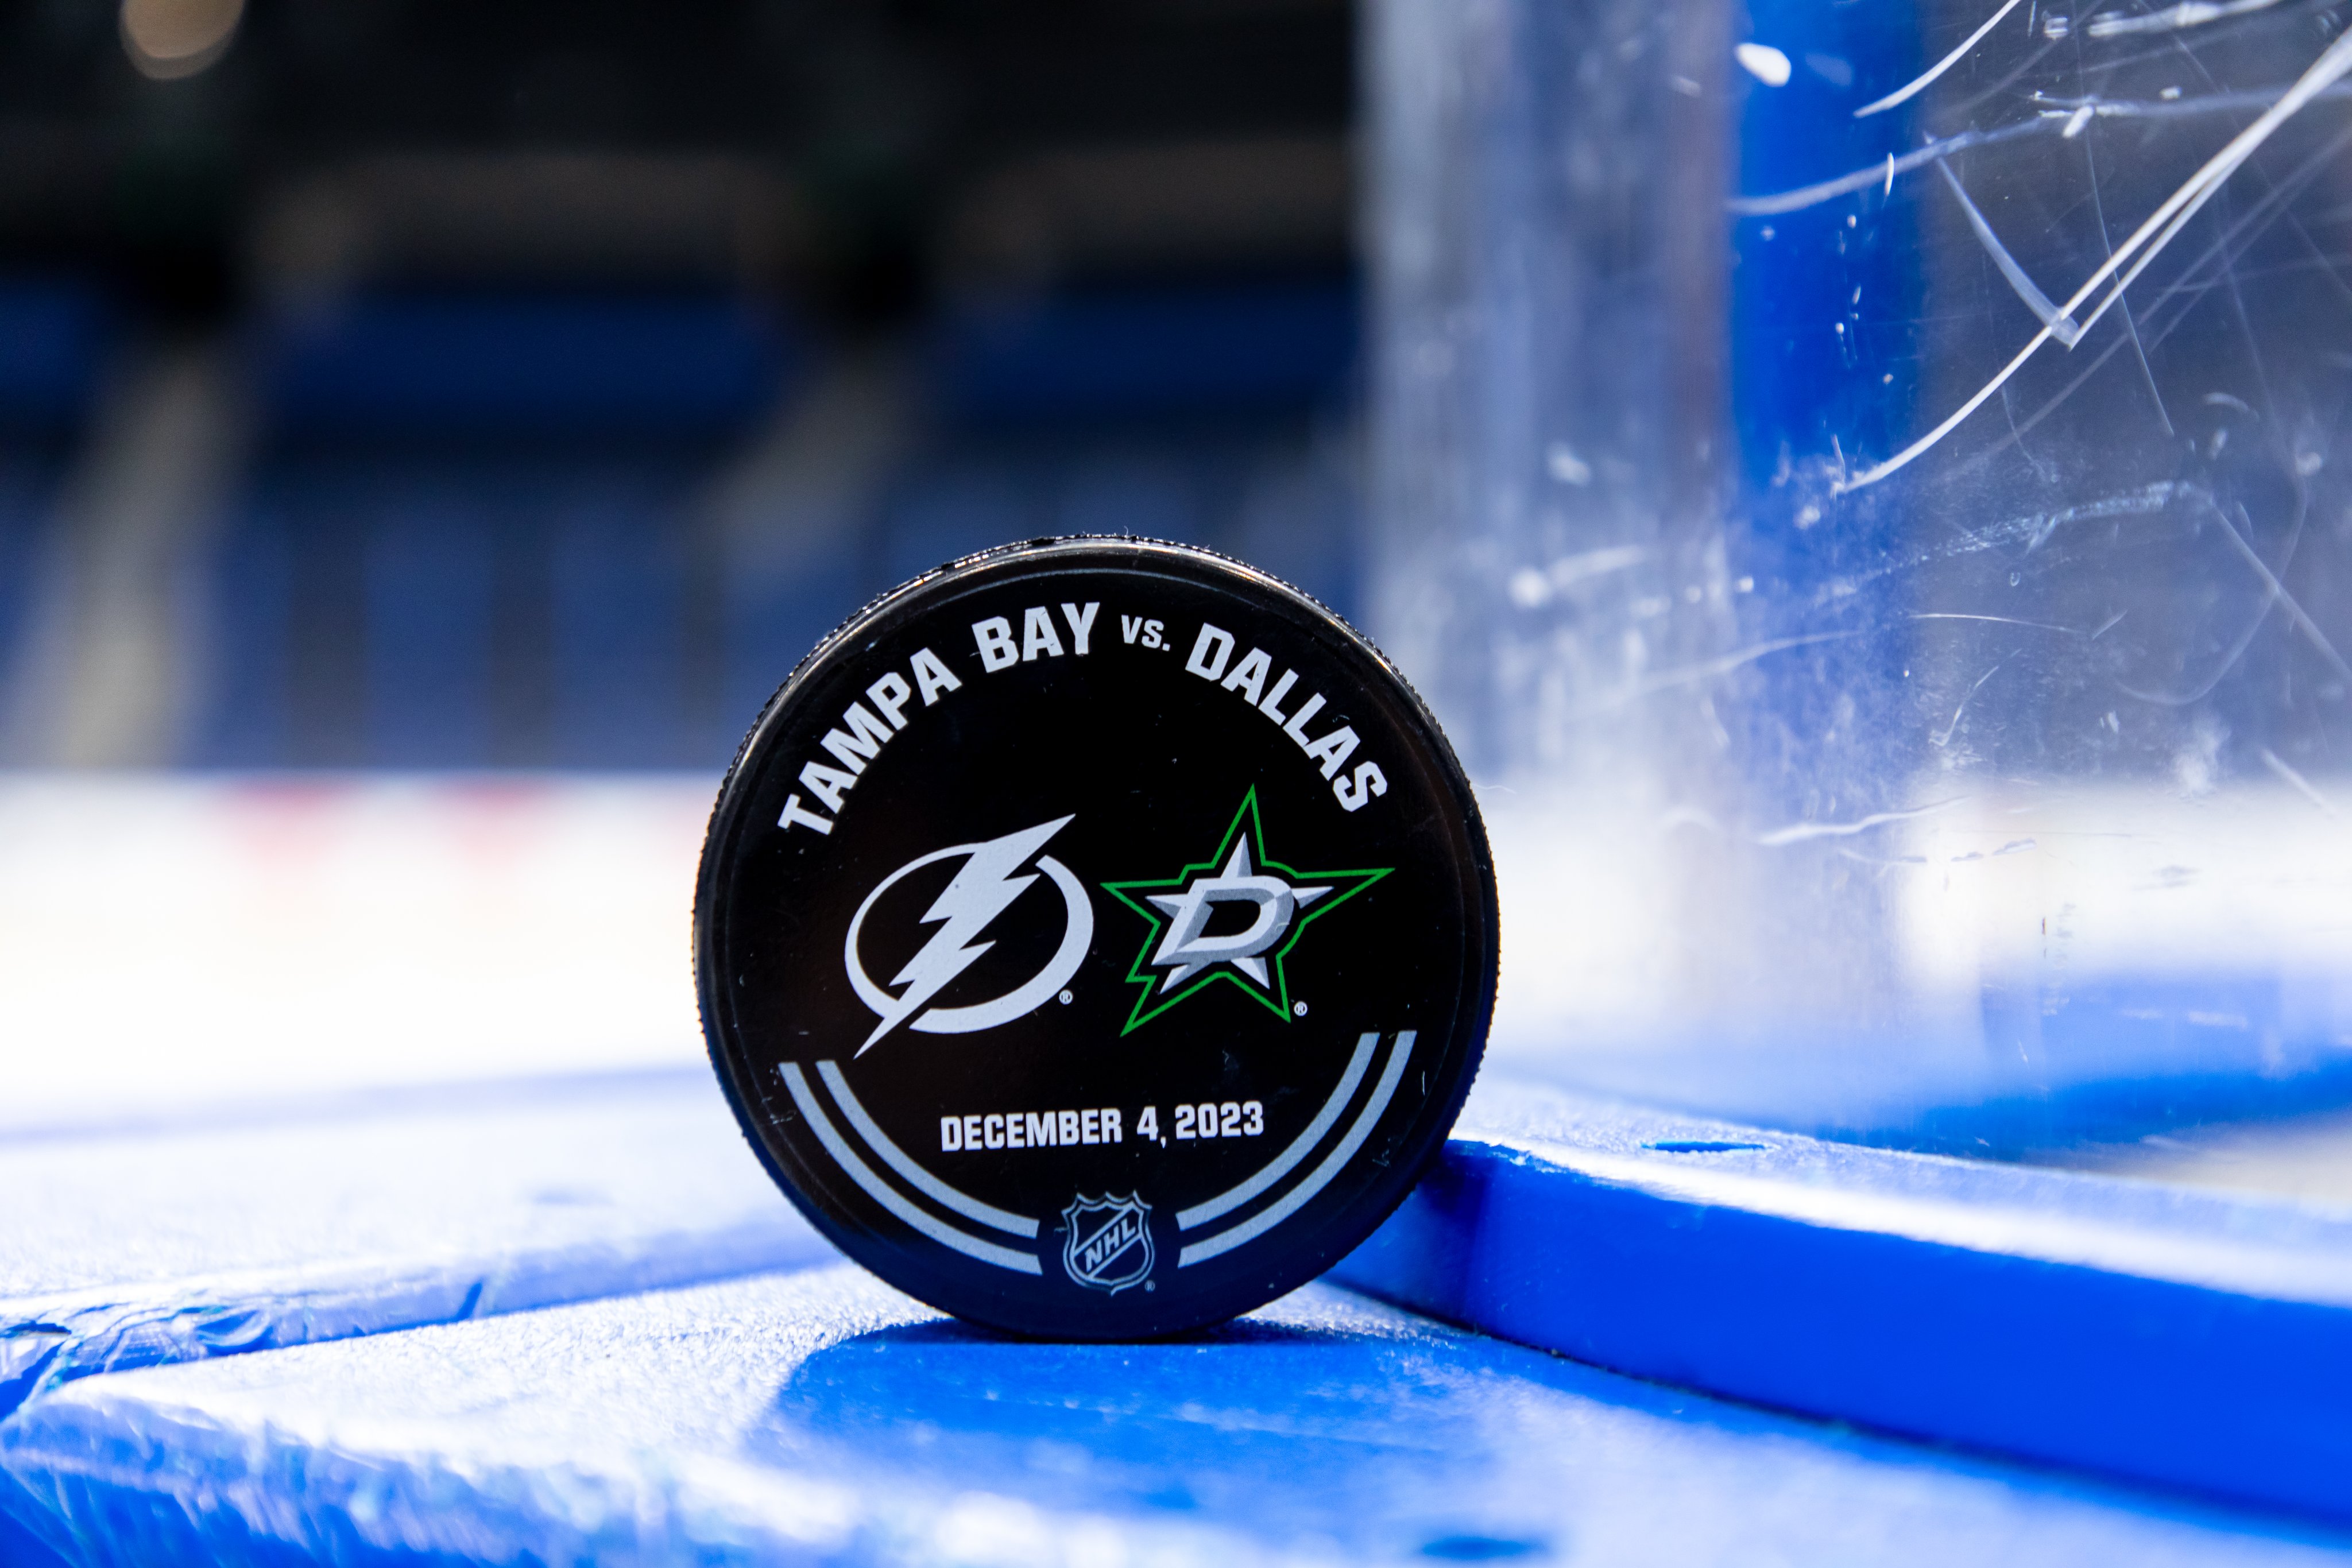 A limited number of used warm-up pucks from tonight's game are now  available online, in our Plaza store and Section 126!